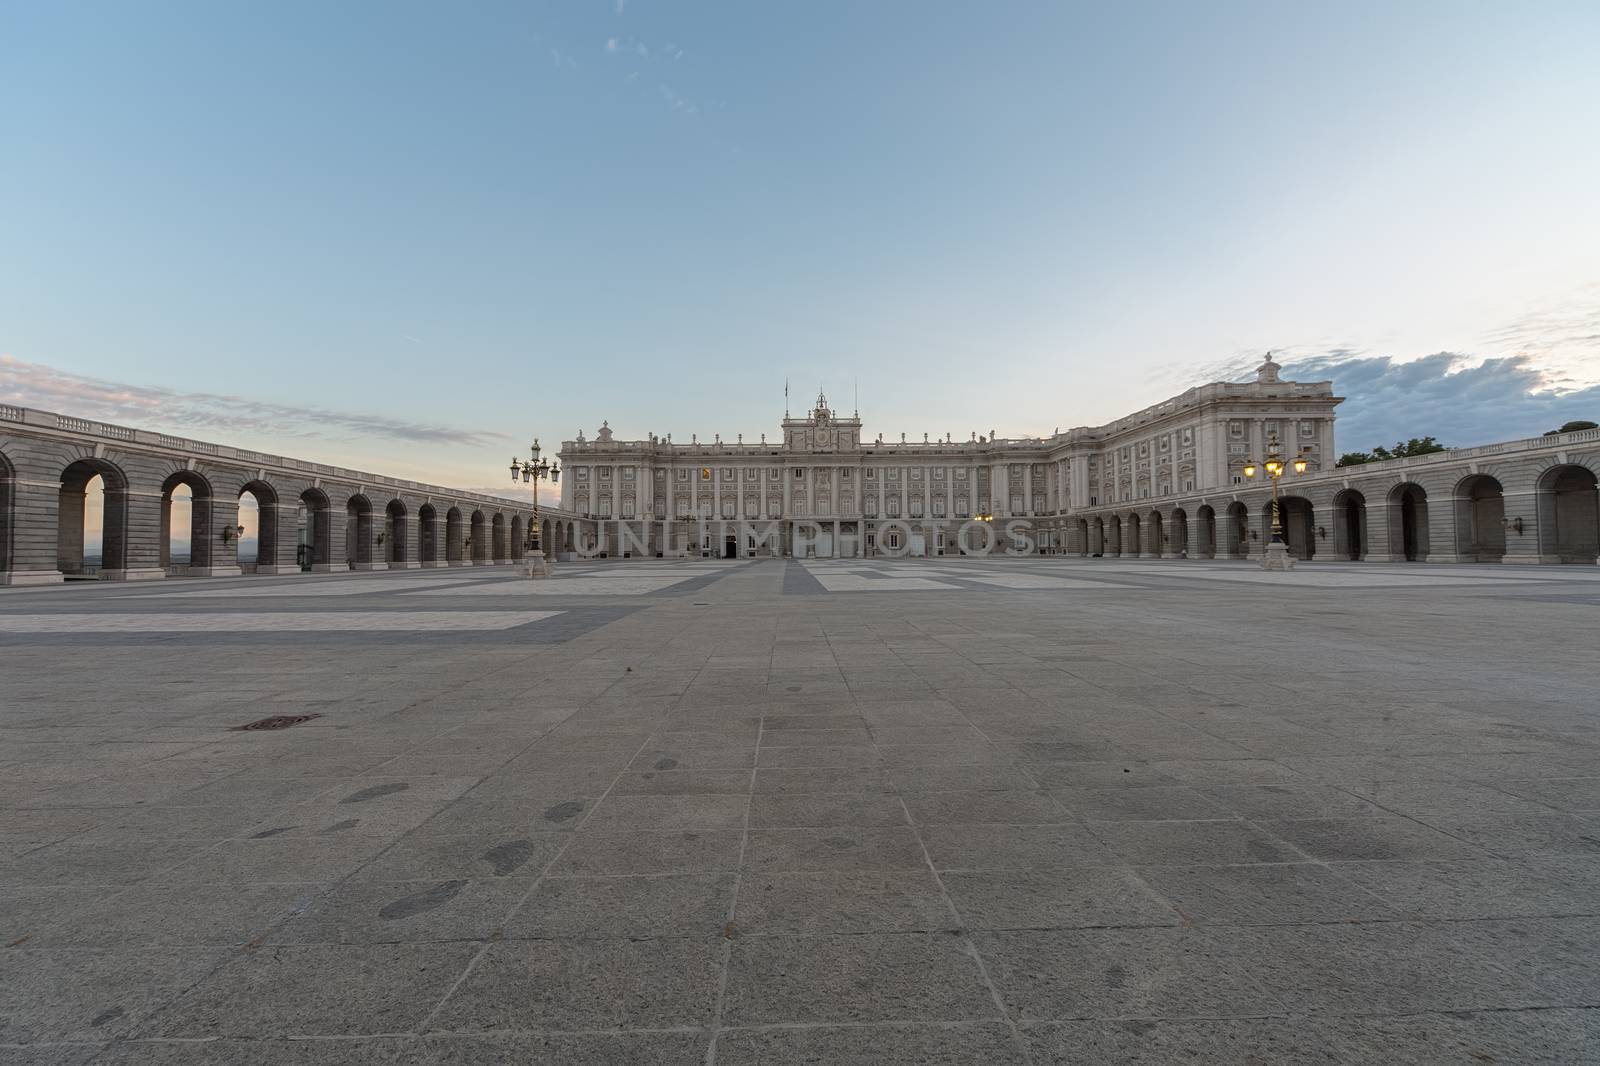 View of the facade of the Royal Palace of Madrid